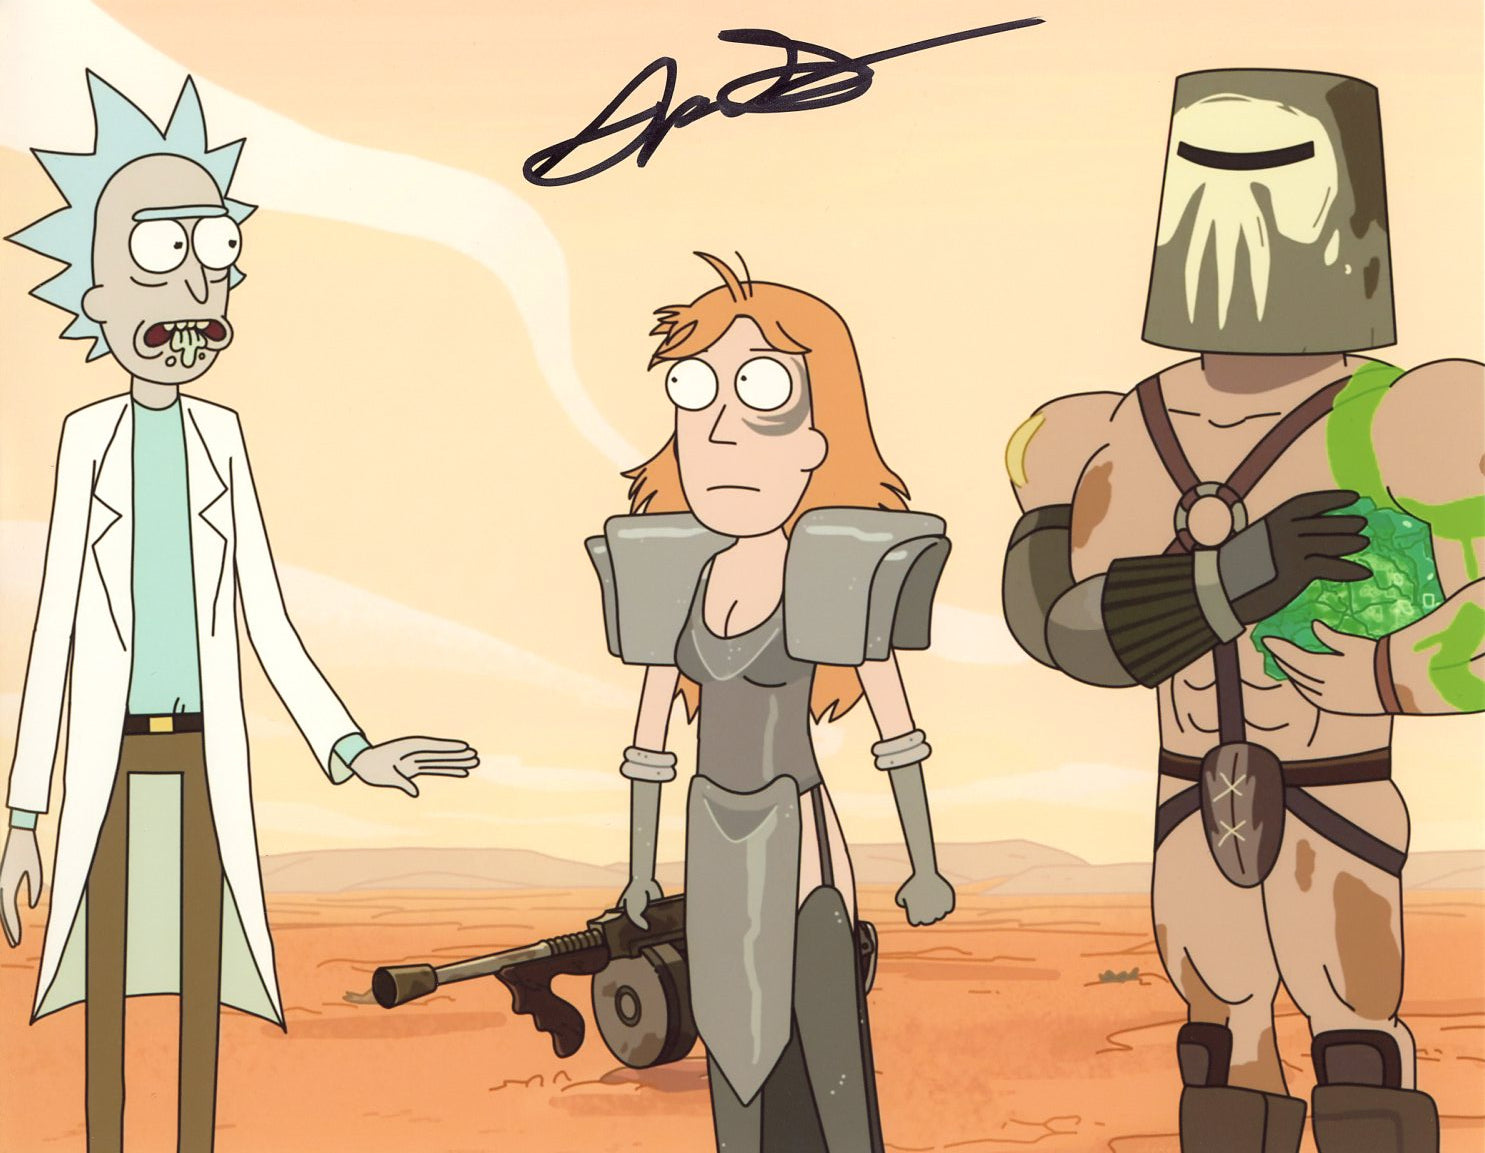 Spencer Grammer Rick and Morty 8x10 Signed Photo JSA Certified Autograph